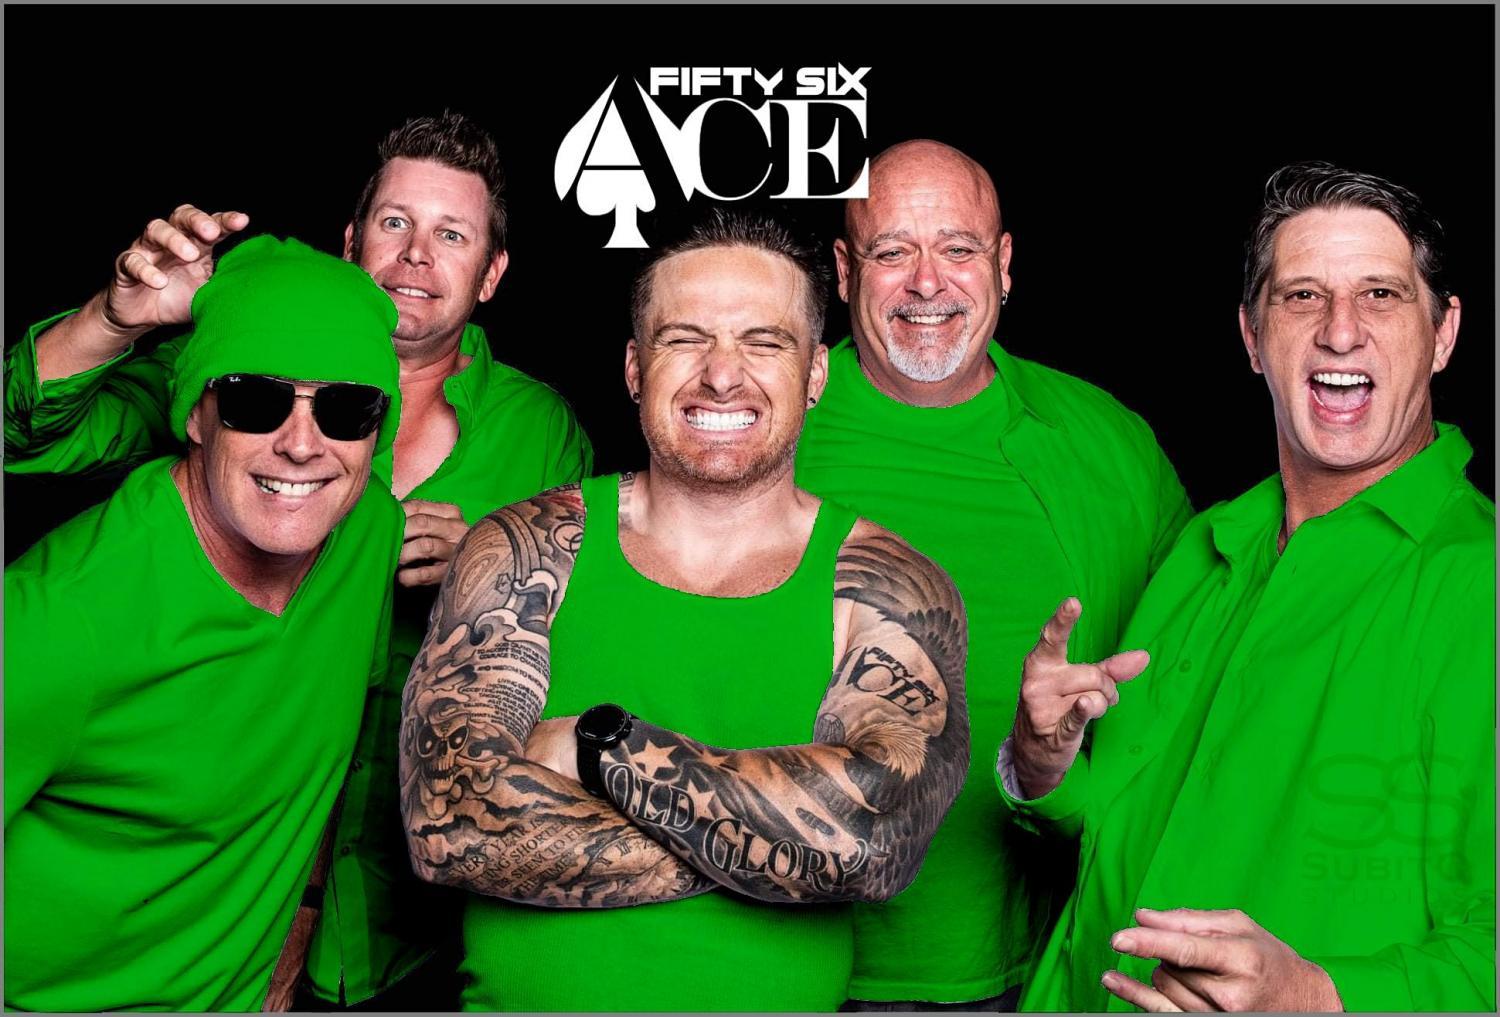 St. Patrick's Day with 56 Ace Band